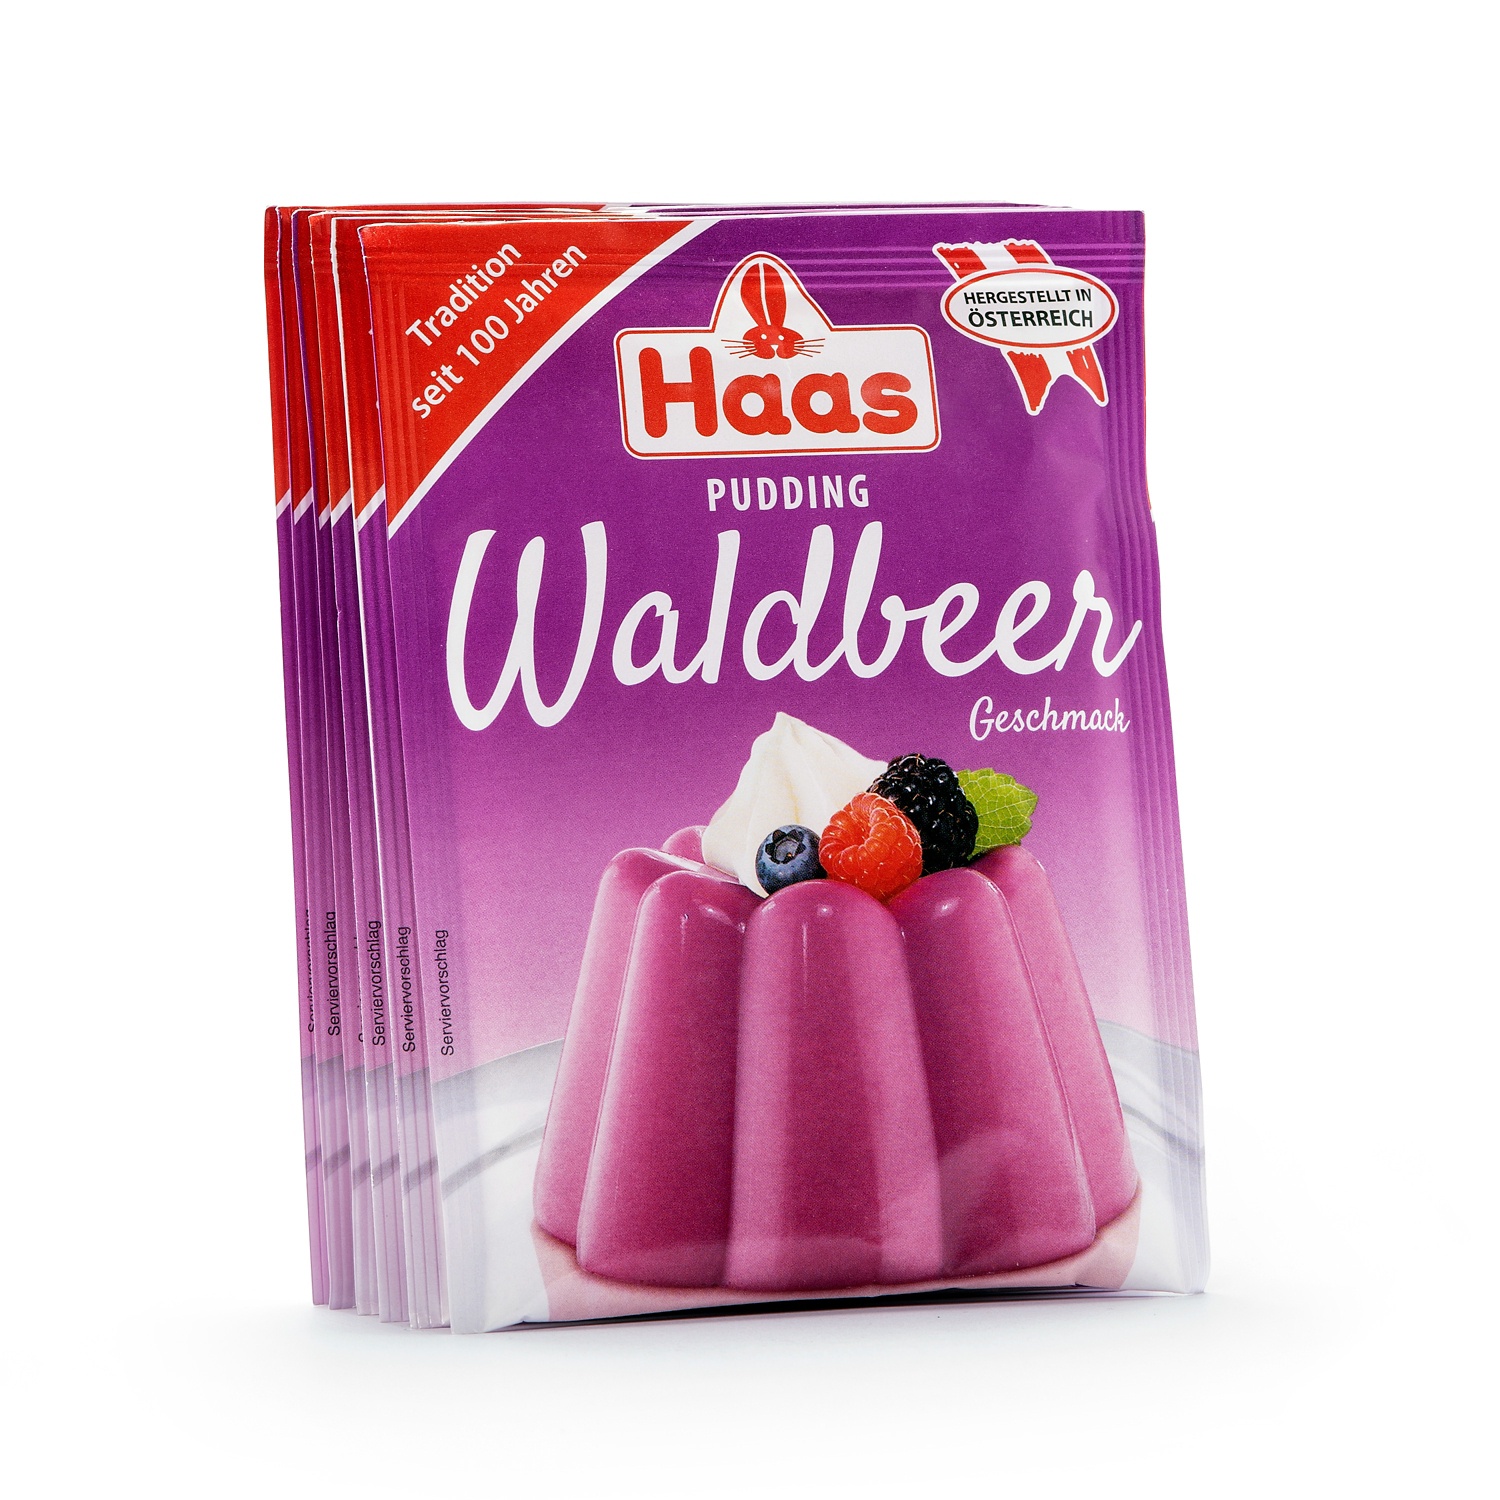 HAAS Partypudding, Waldbeer